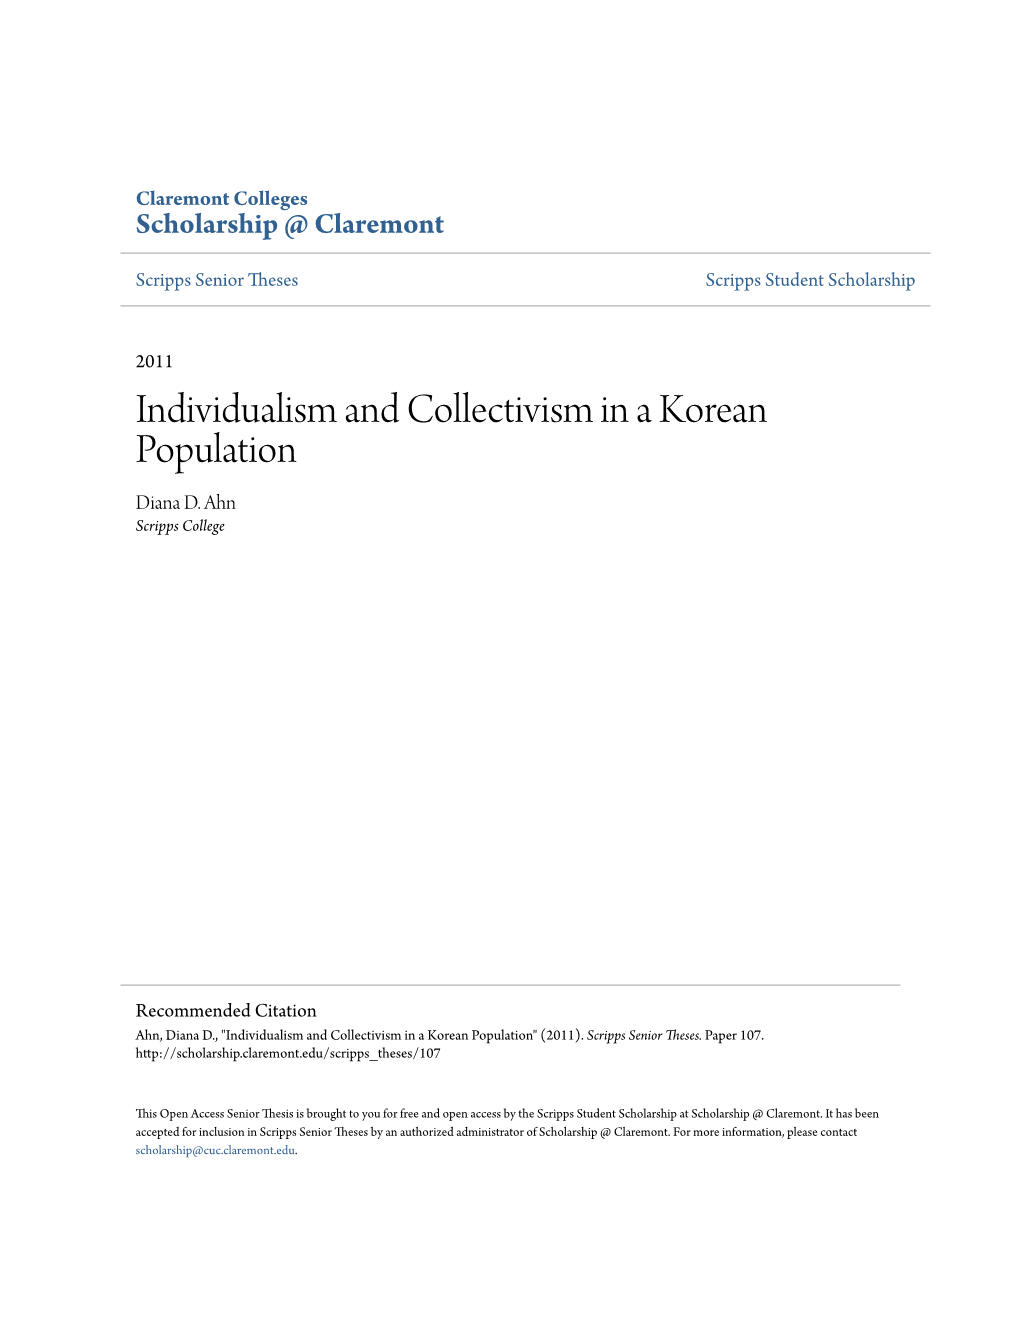 Individualism and Collectivism in a Korean Population Diana D